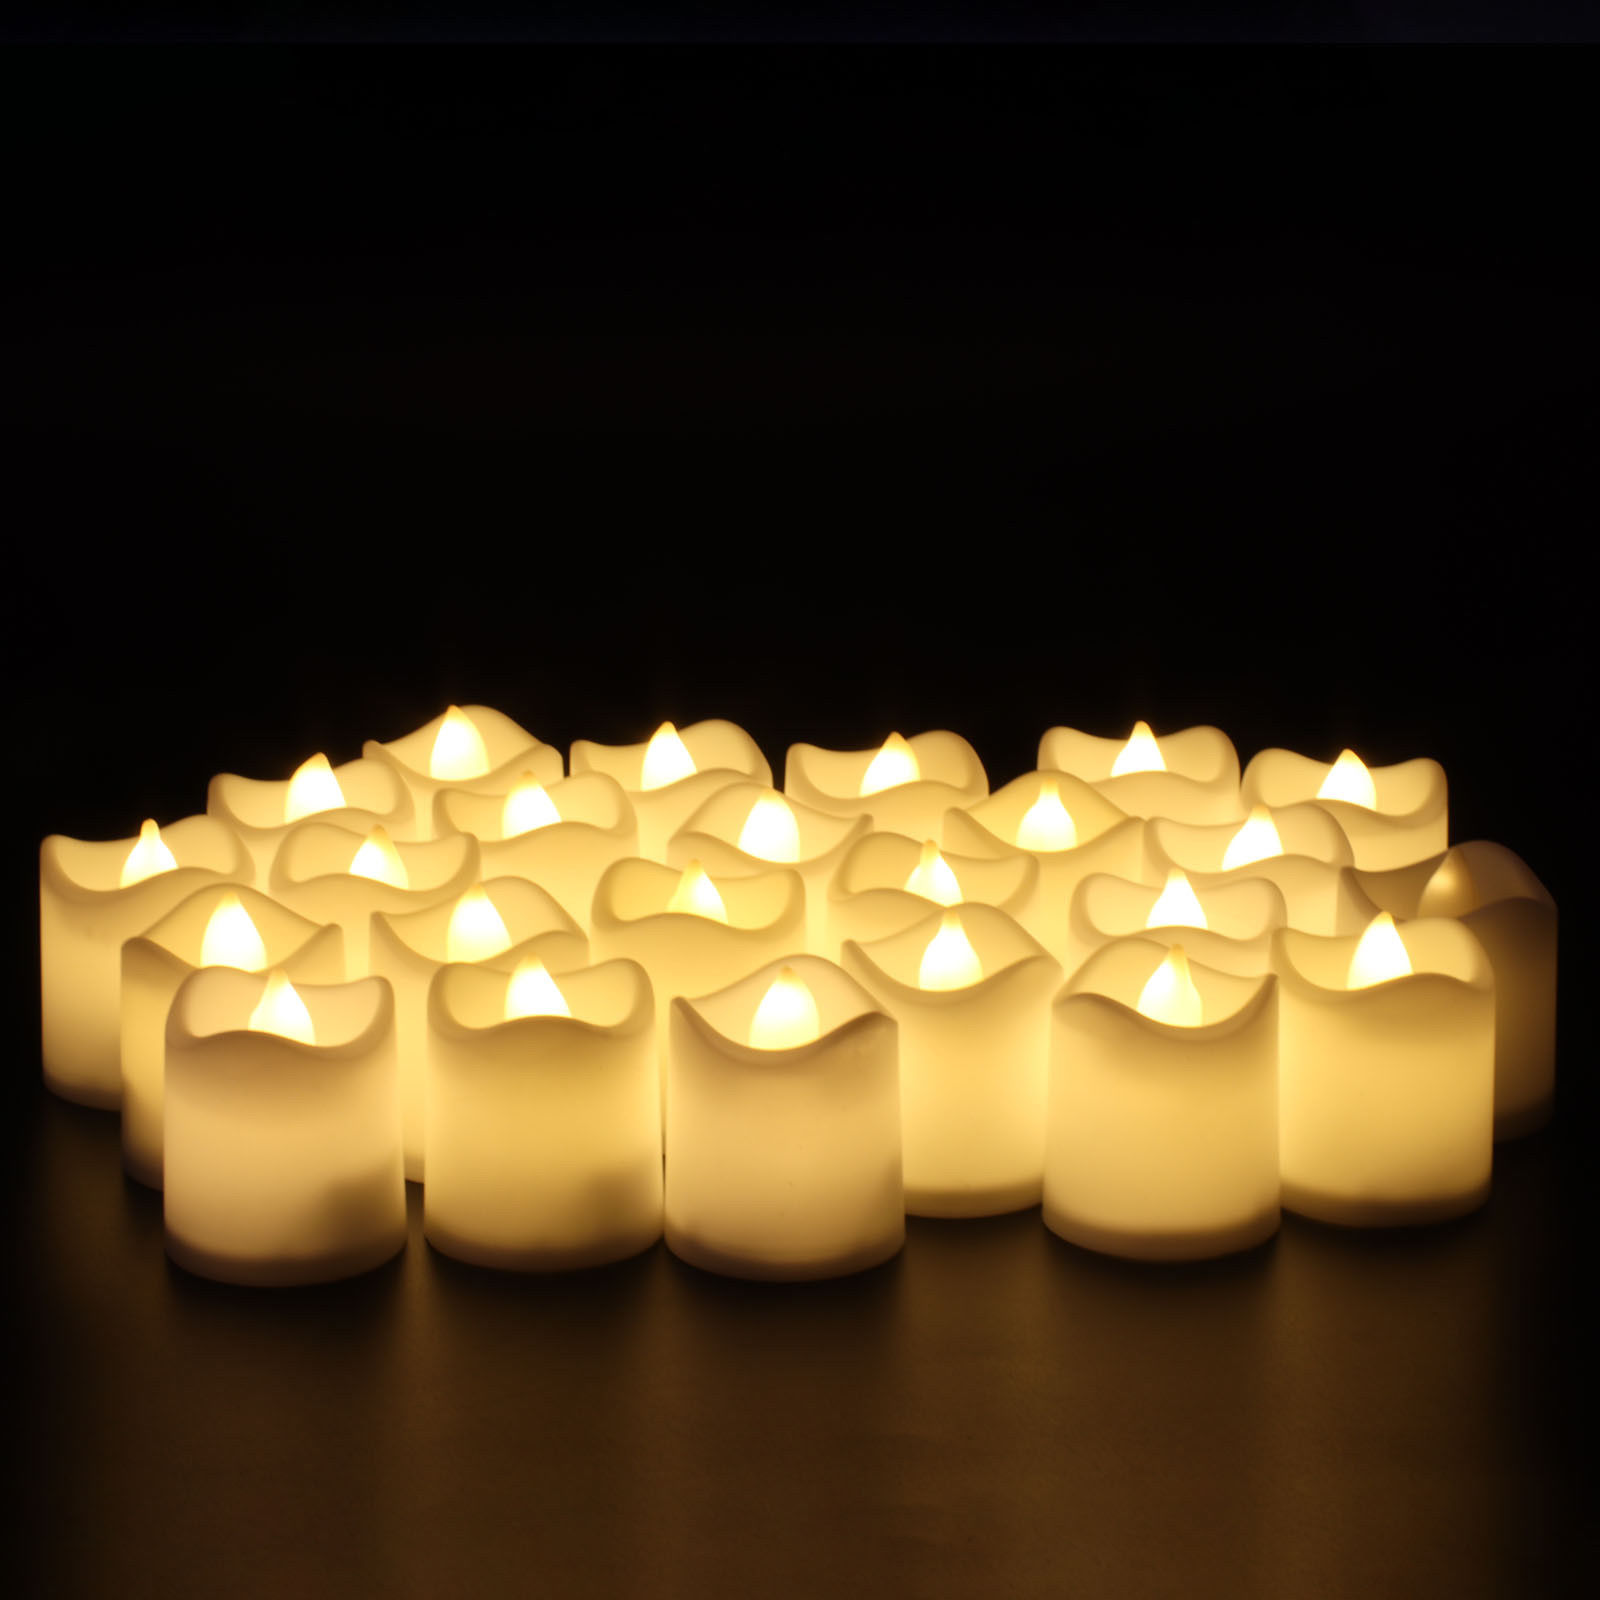 24-LED TEA LIGHT TEALIGHT CANDLE CANDLES FLAMELESS WEDDING BATTERY INCLUDED 